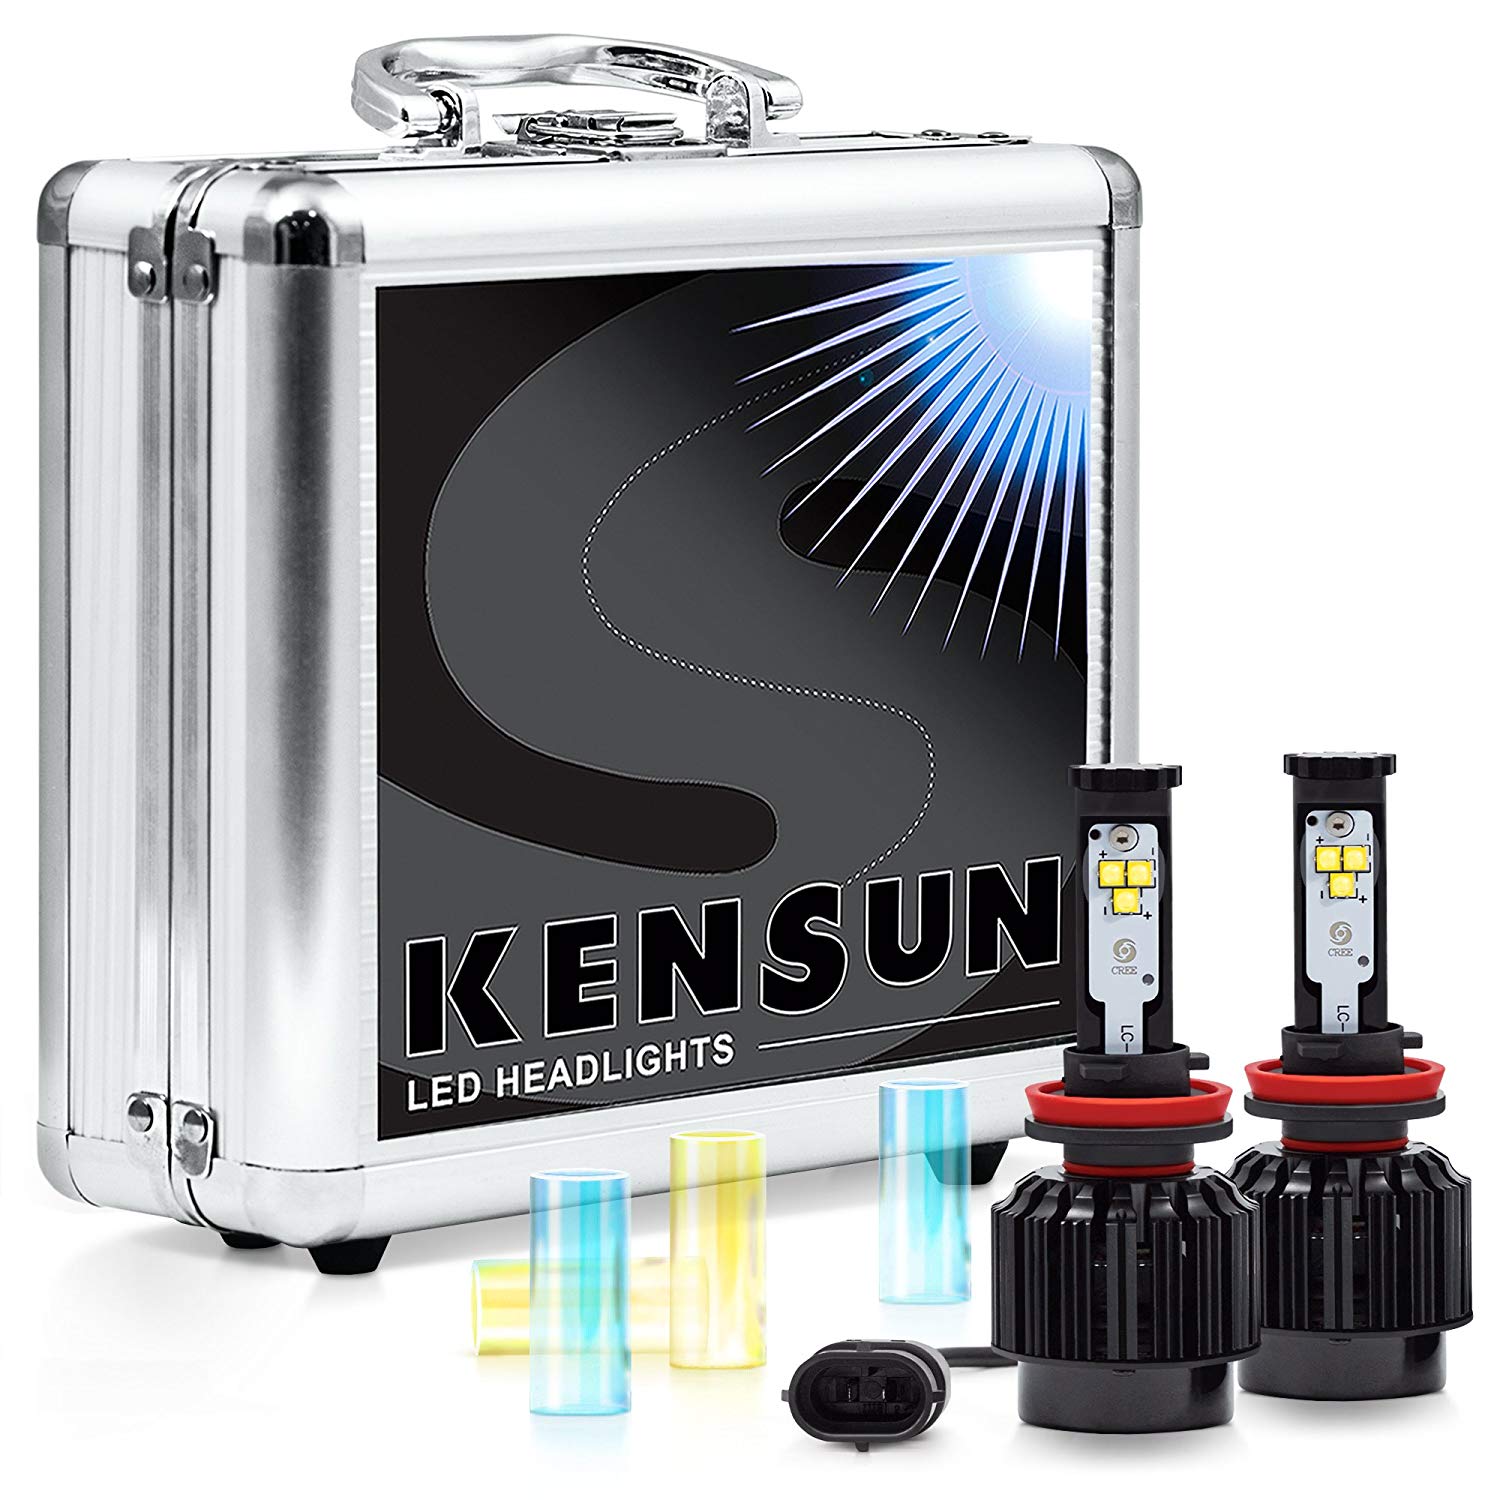 Kensun New Technology All-in-One LED Headlight Conversion Kit